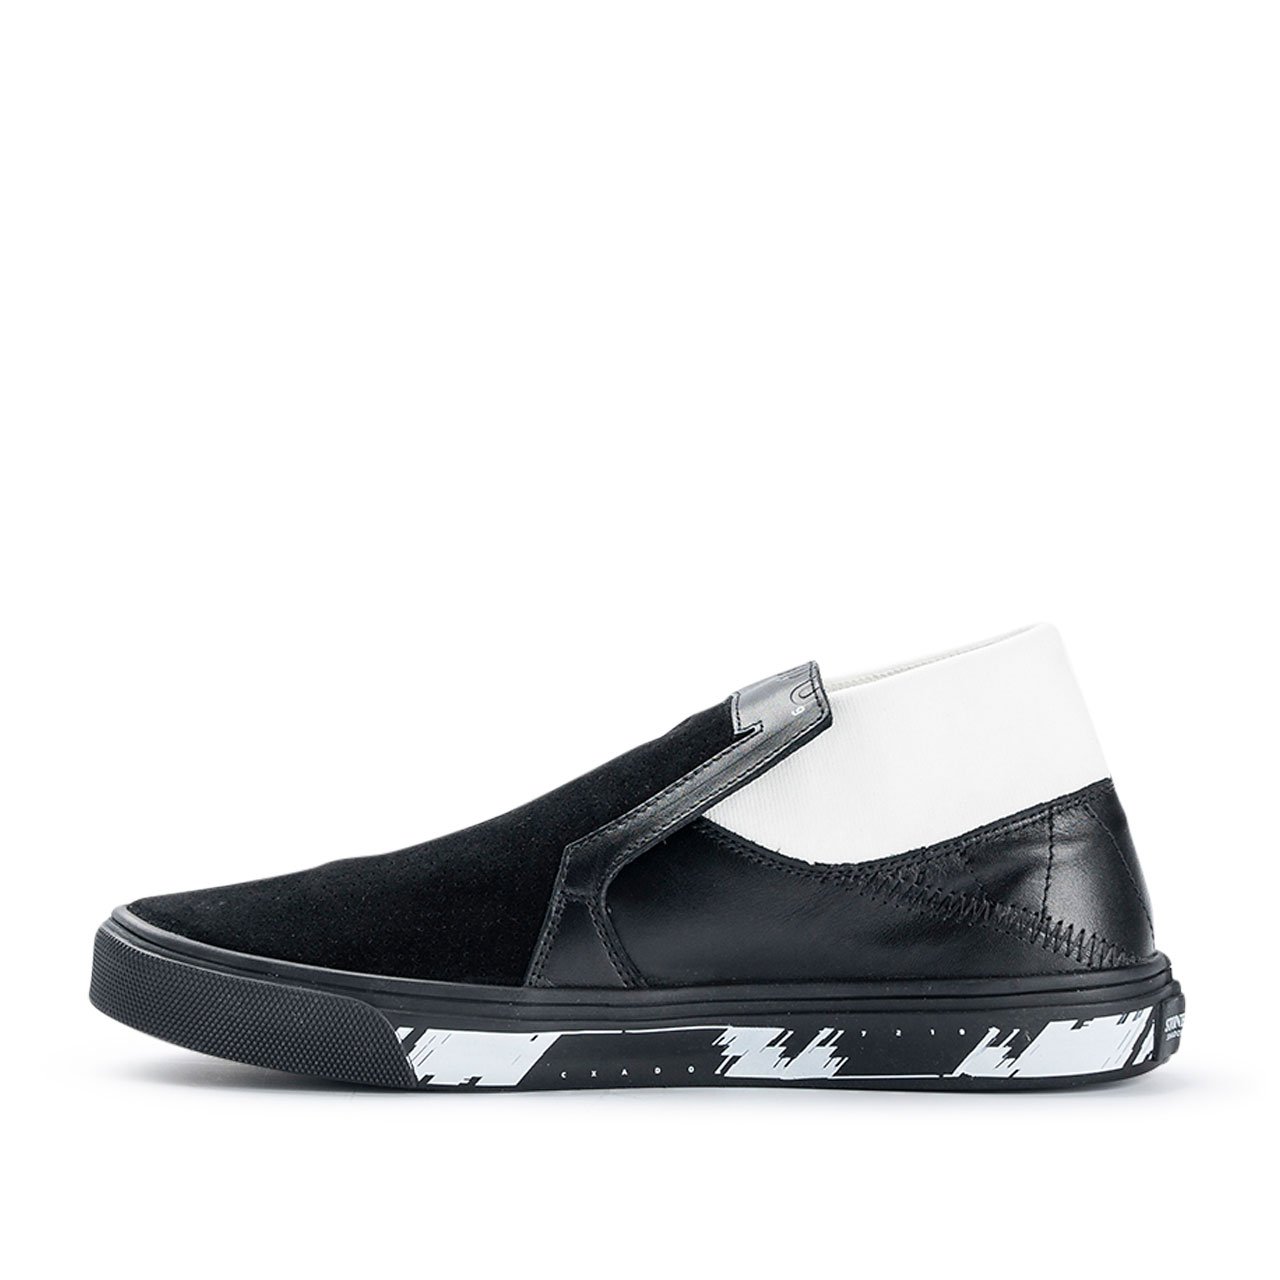 stone island shadow project slip-on mid leather (black) - 7219s0123.v0029 - a.plus - Image - 3